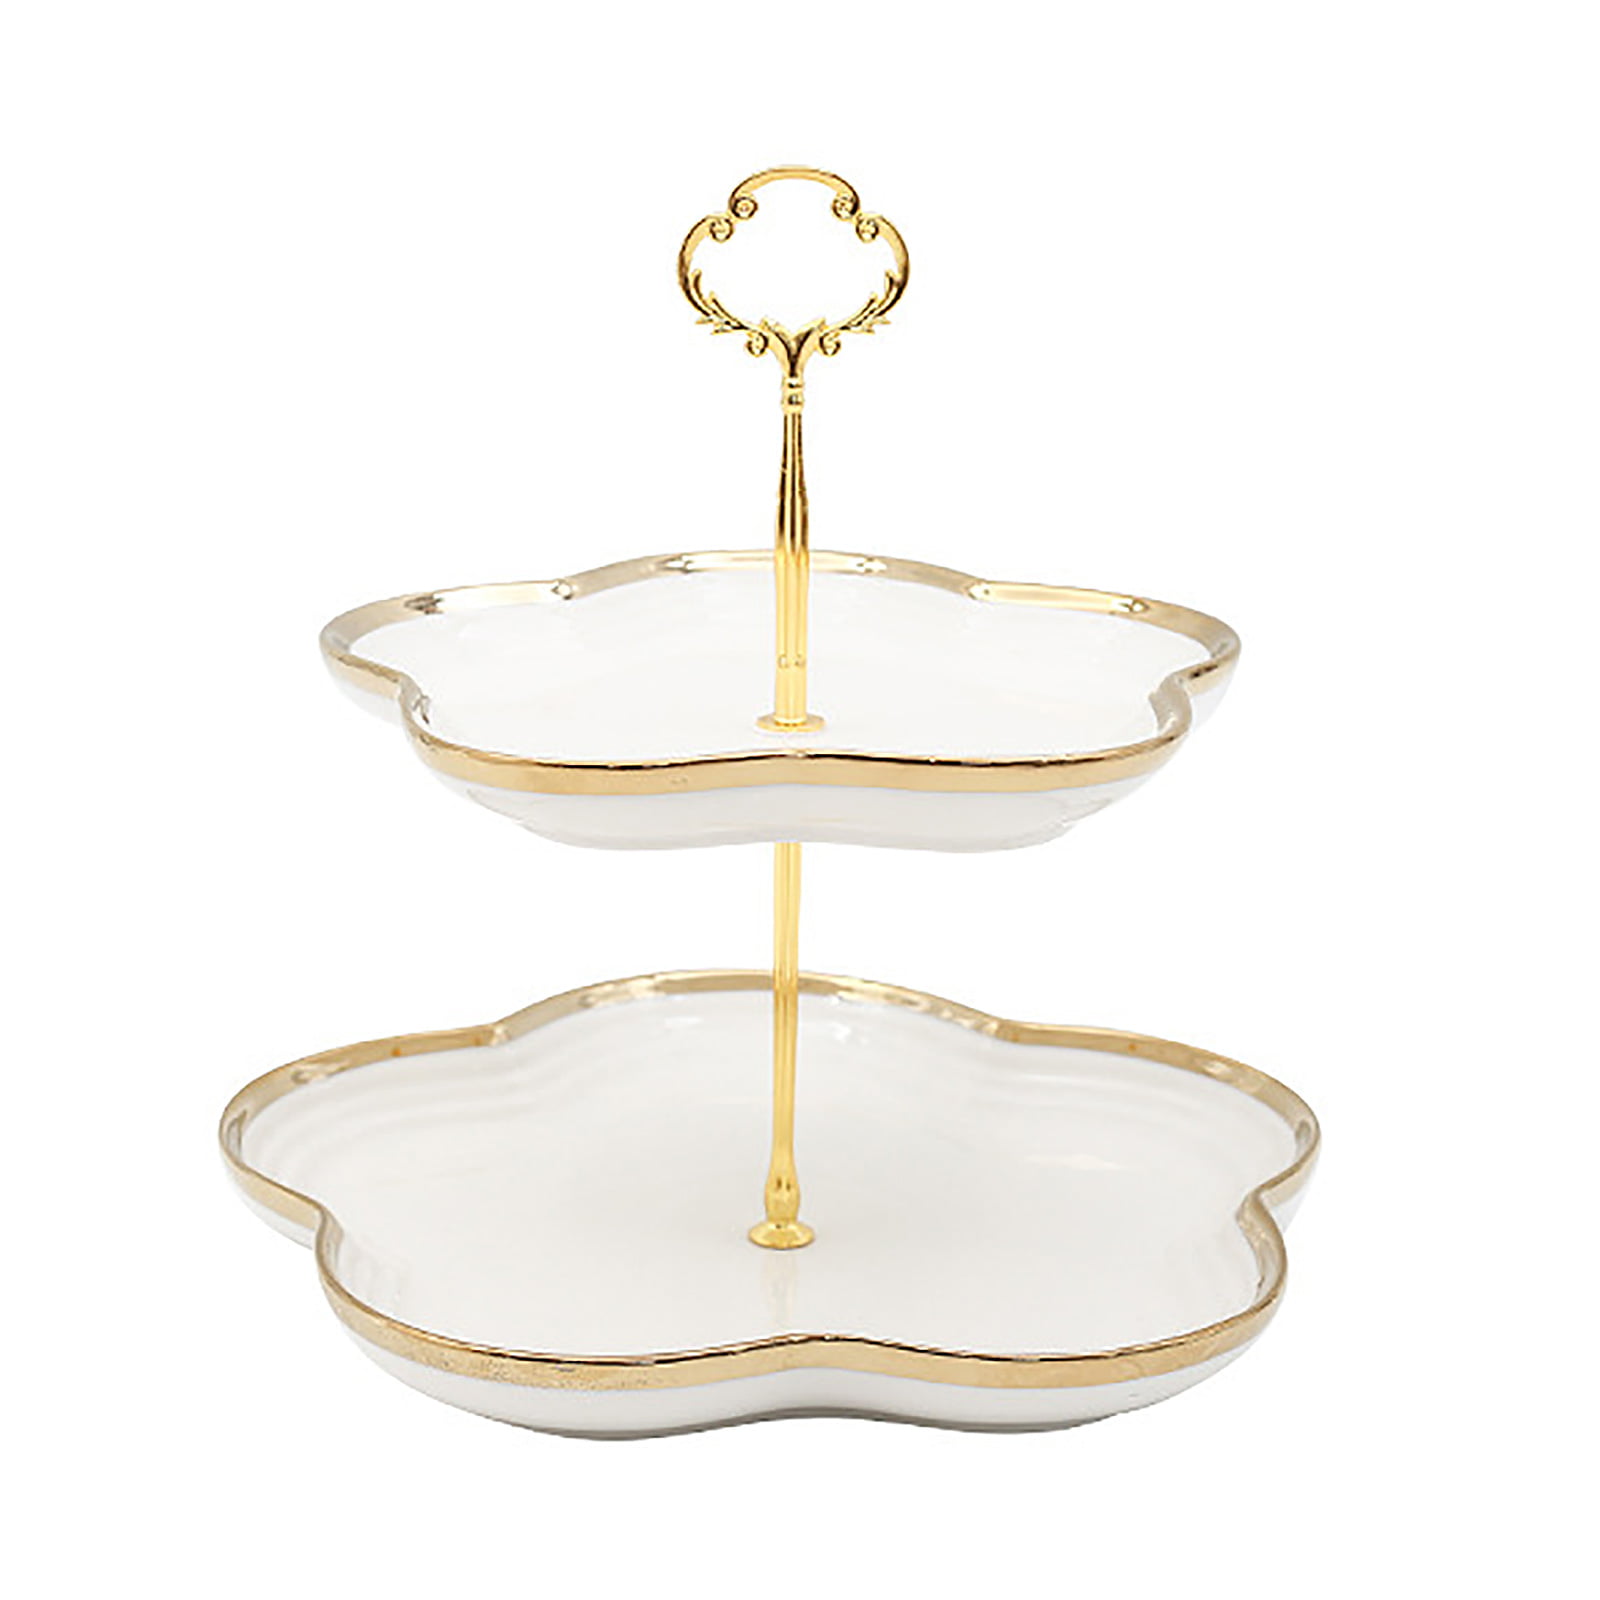 2 Tier CERAMIC Cake Stand Afternoon Tea Wedding Plates Party Tableware Display 